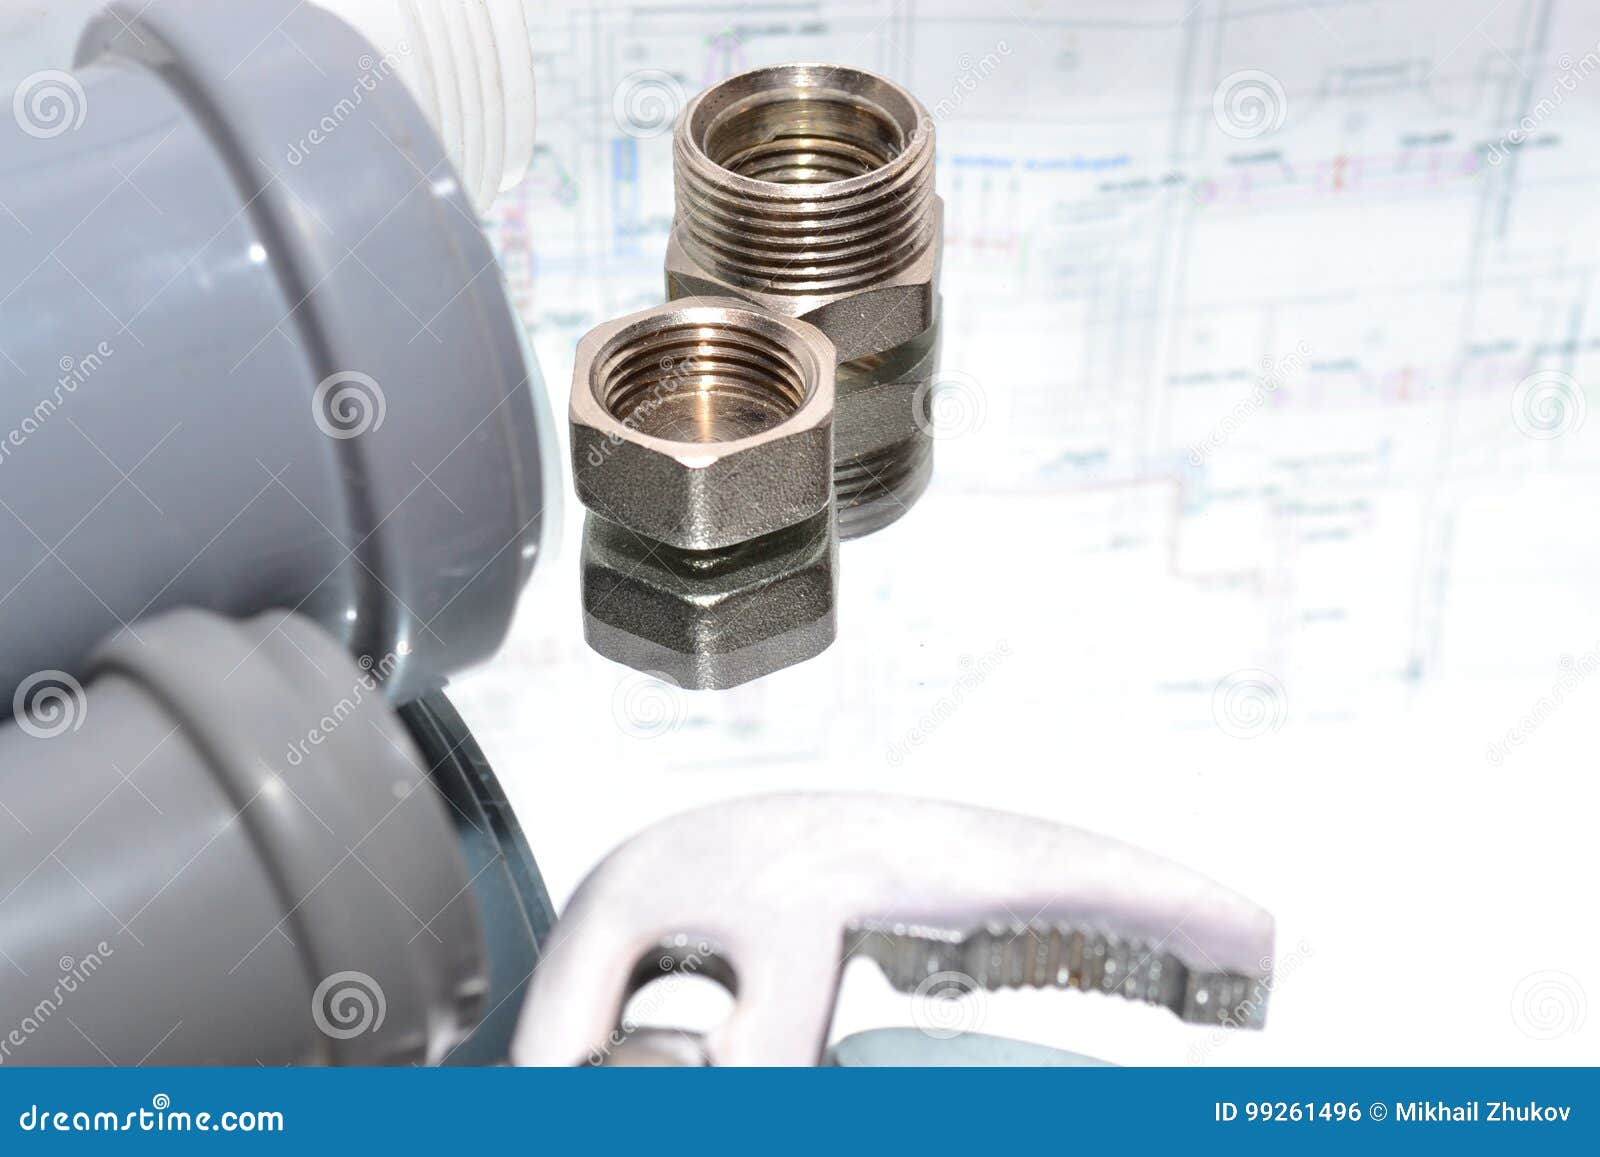 Replacement Of Plumbing Accessories Stock Photo Image Of Plan